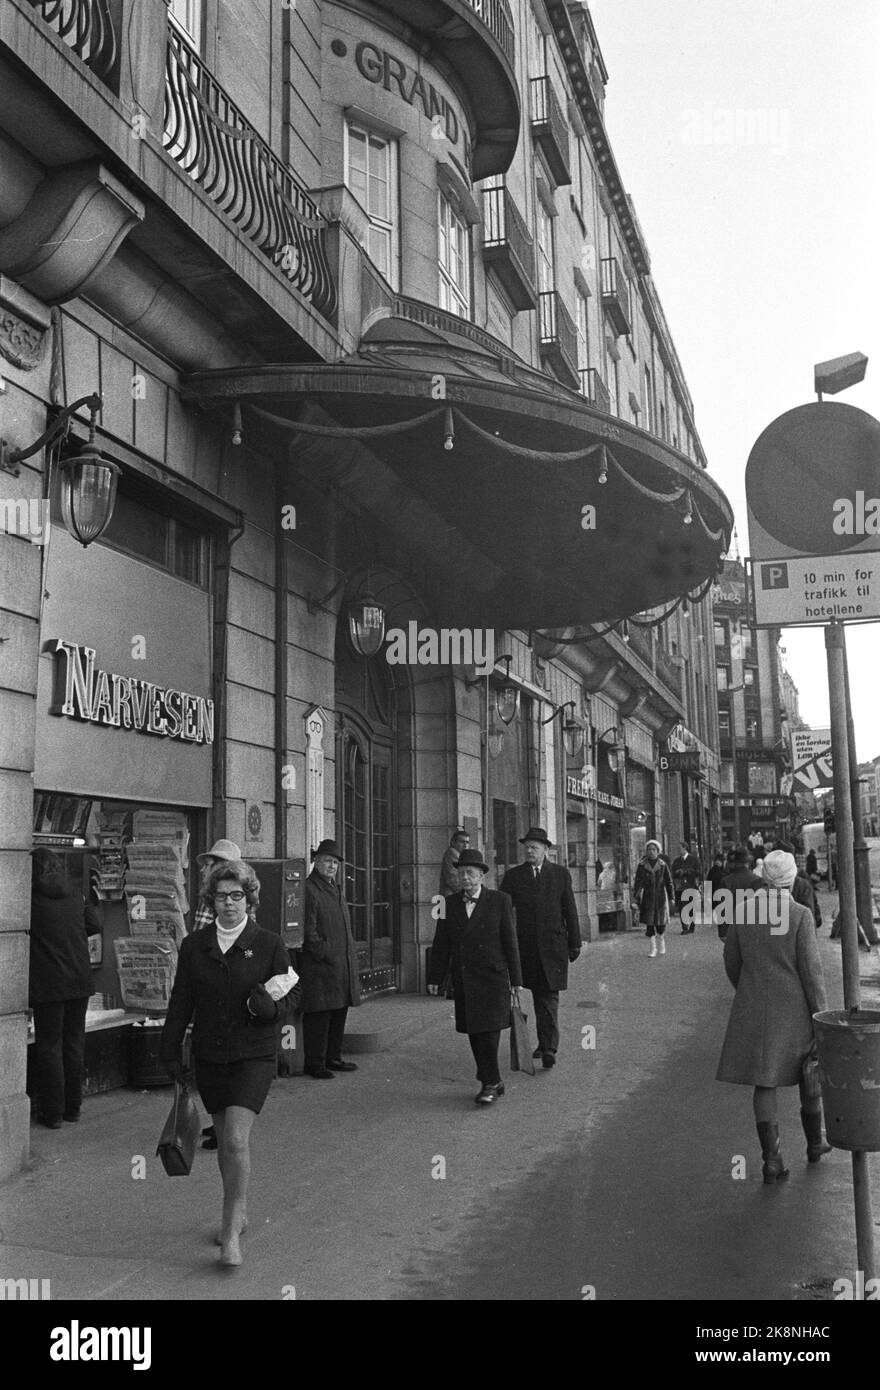 Oslo, 19710125. Exterior motif of the Grand Hotel. Karl Johans gate 31. The entrance area with the characteristic canopy. Narvesen kiosk t.v. For the entrance area, traffic signs, men with hat and coat and woman in mini skirts. Photo: Henrik Laurvik Stock Photo